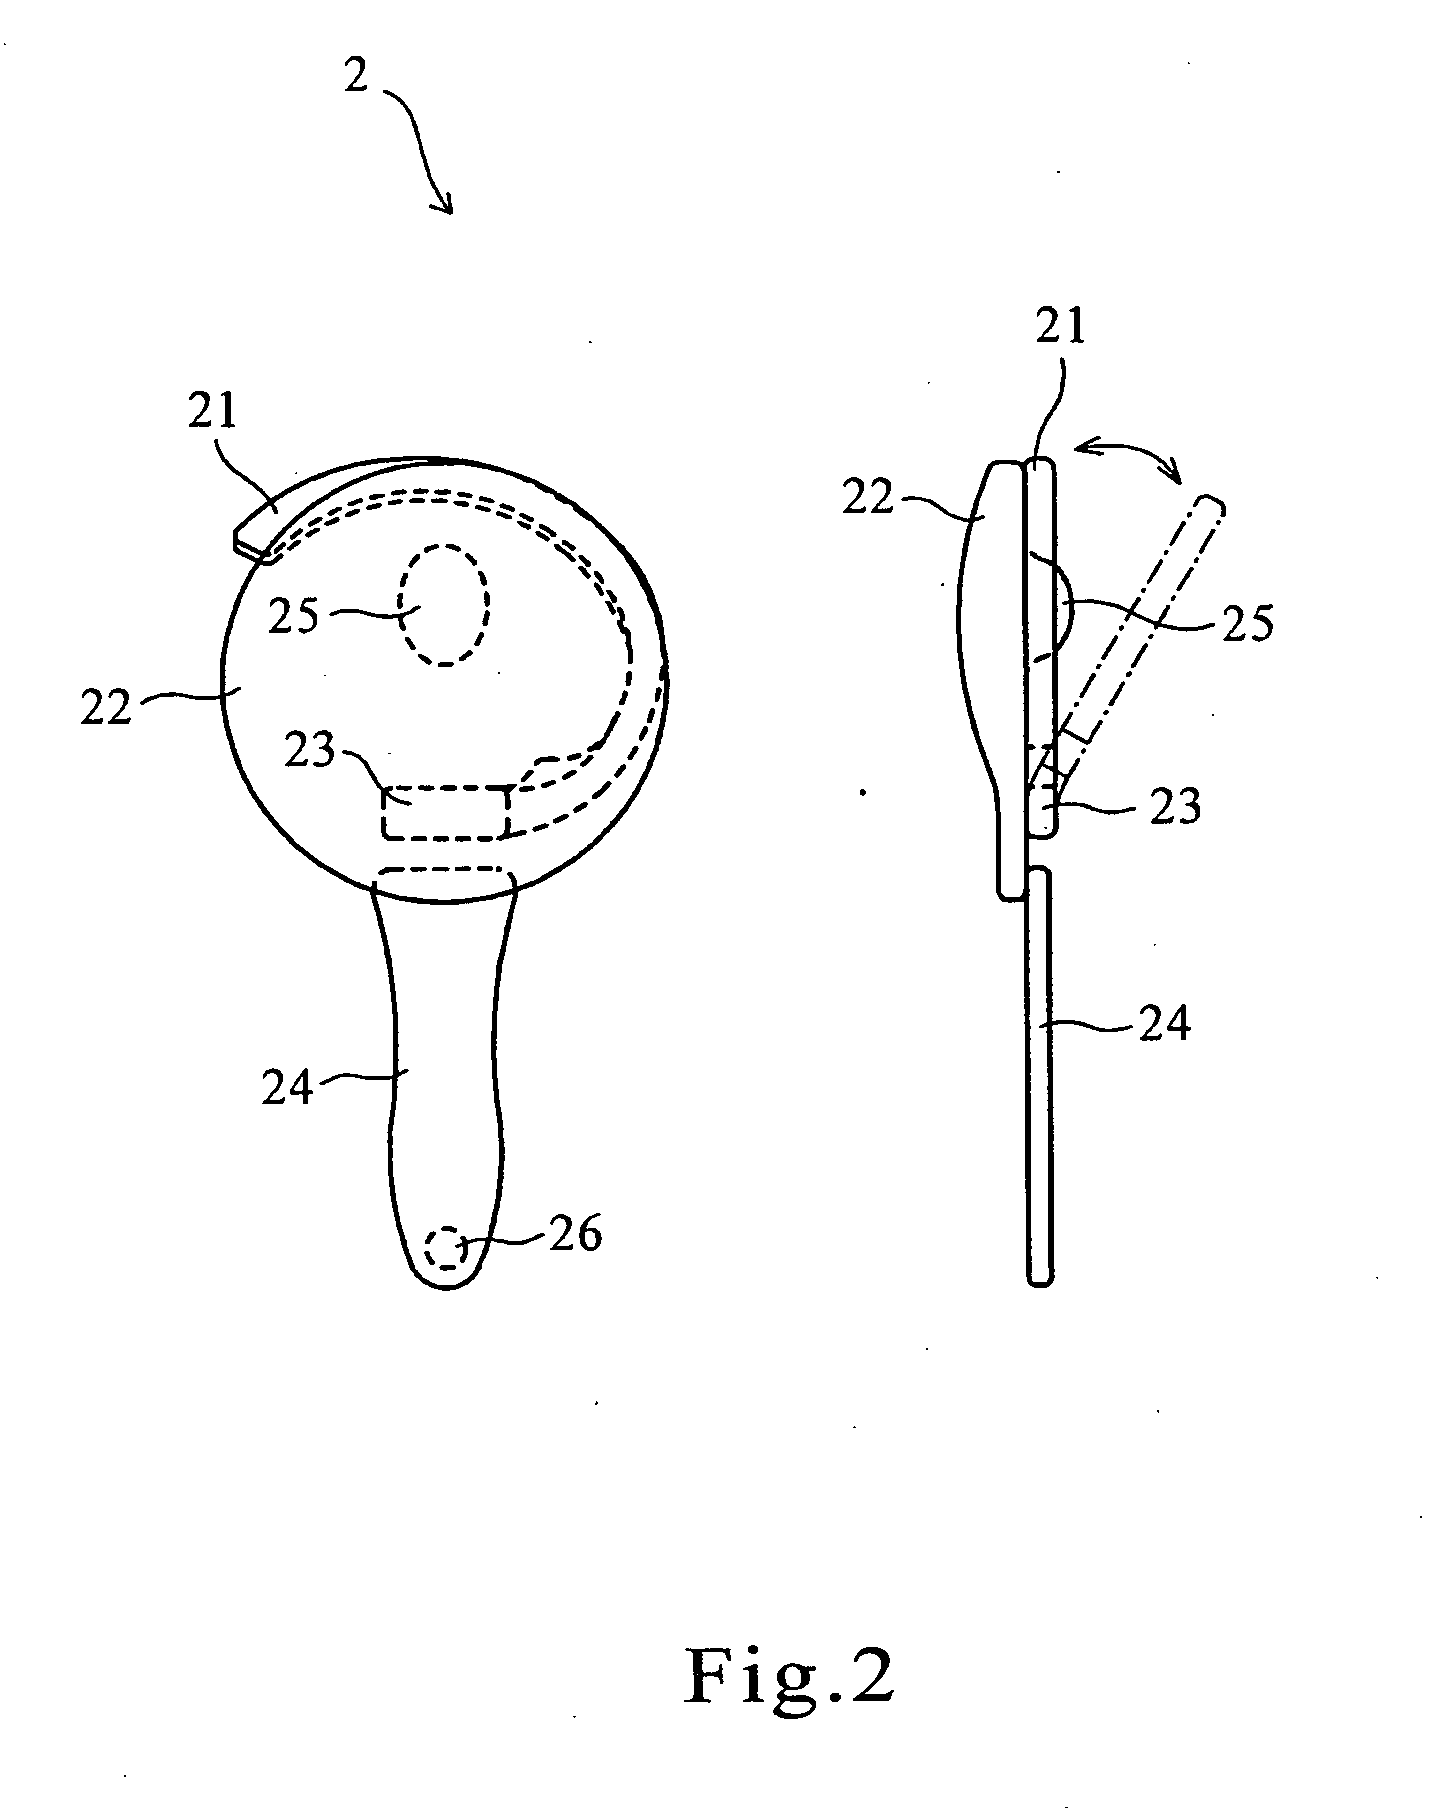 Wireless earphone enabling a ringing signal and method for controlling the ringing signal